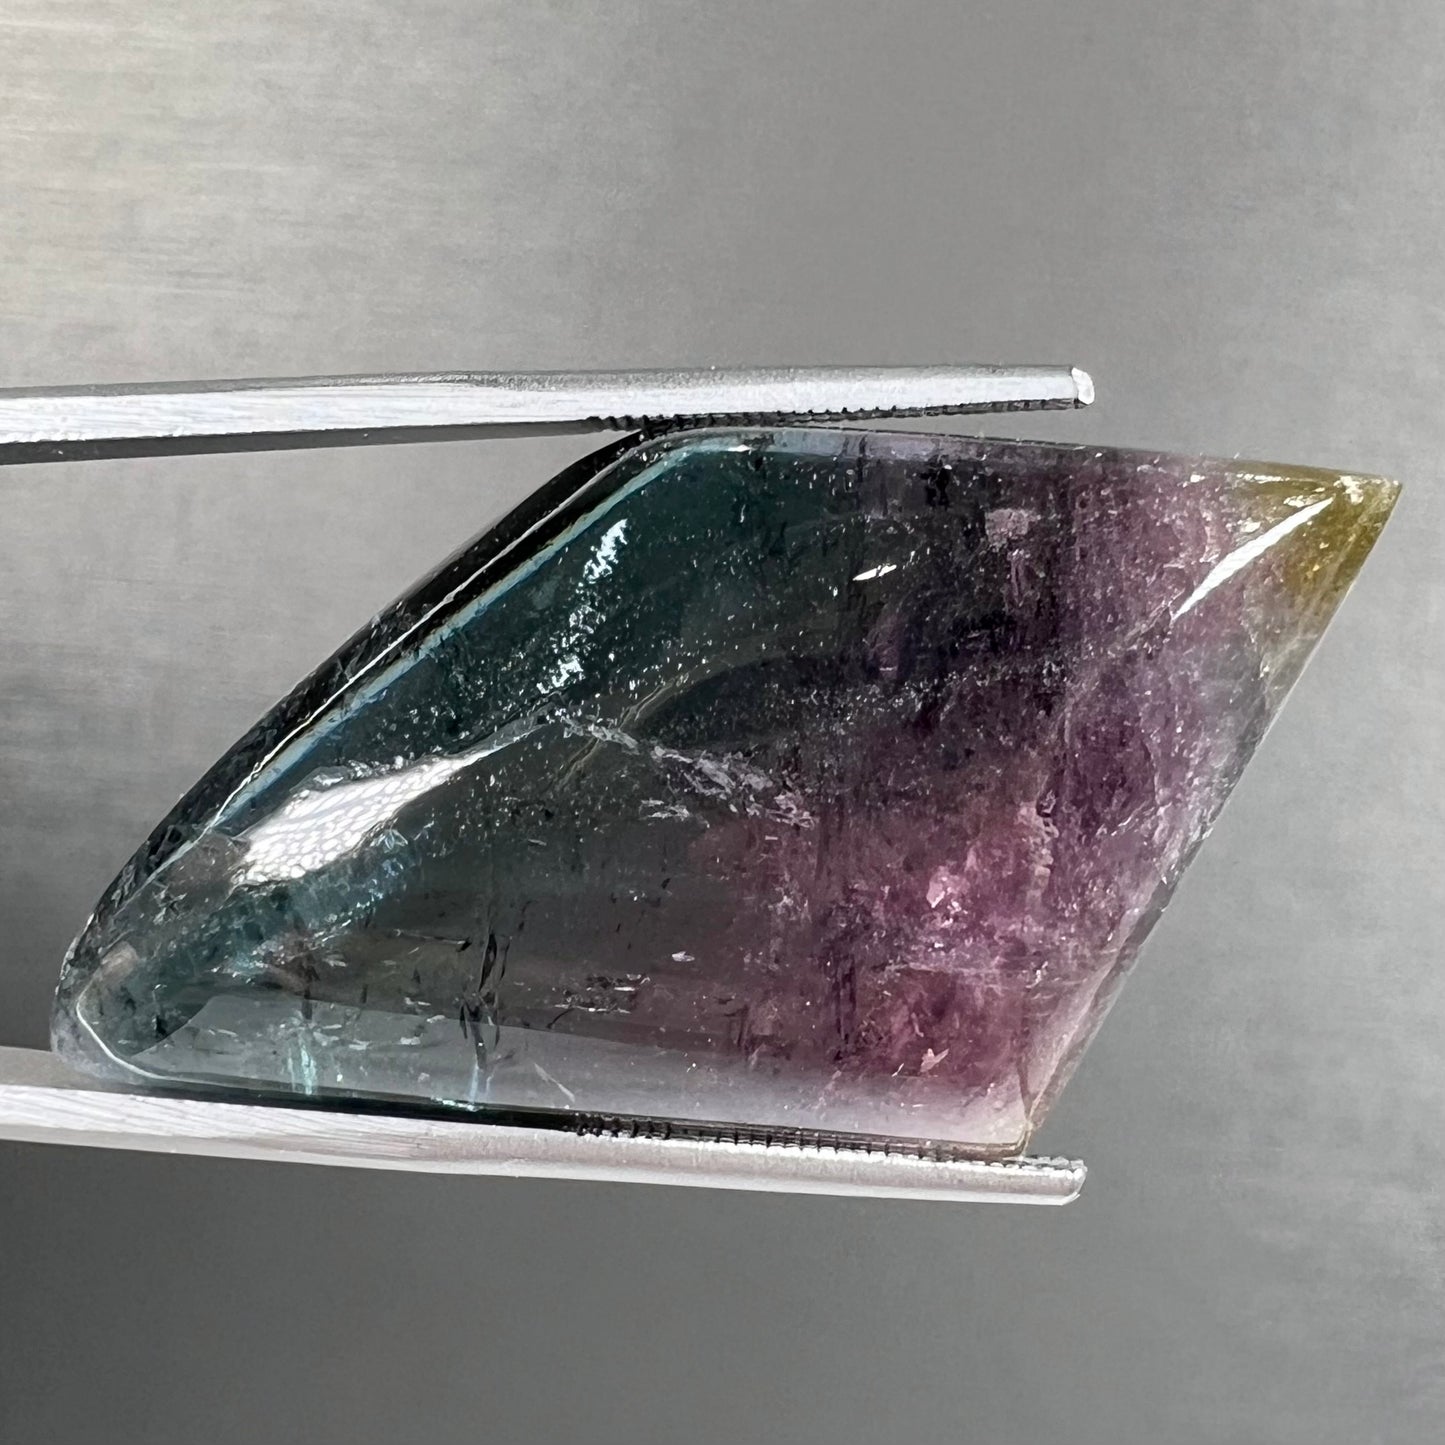 A loose, freeform cabochon cut tricolor tourmaline stone that has blue, pink, and yellow colors.